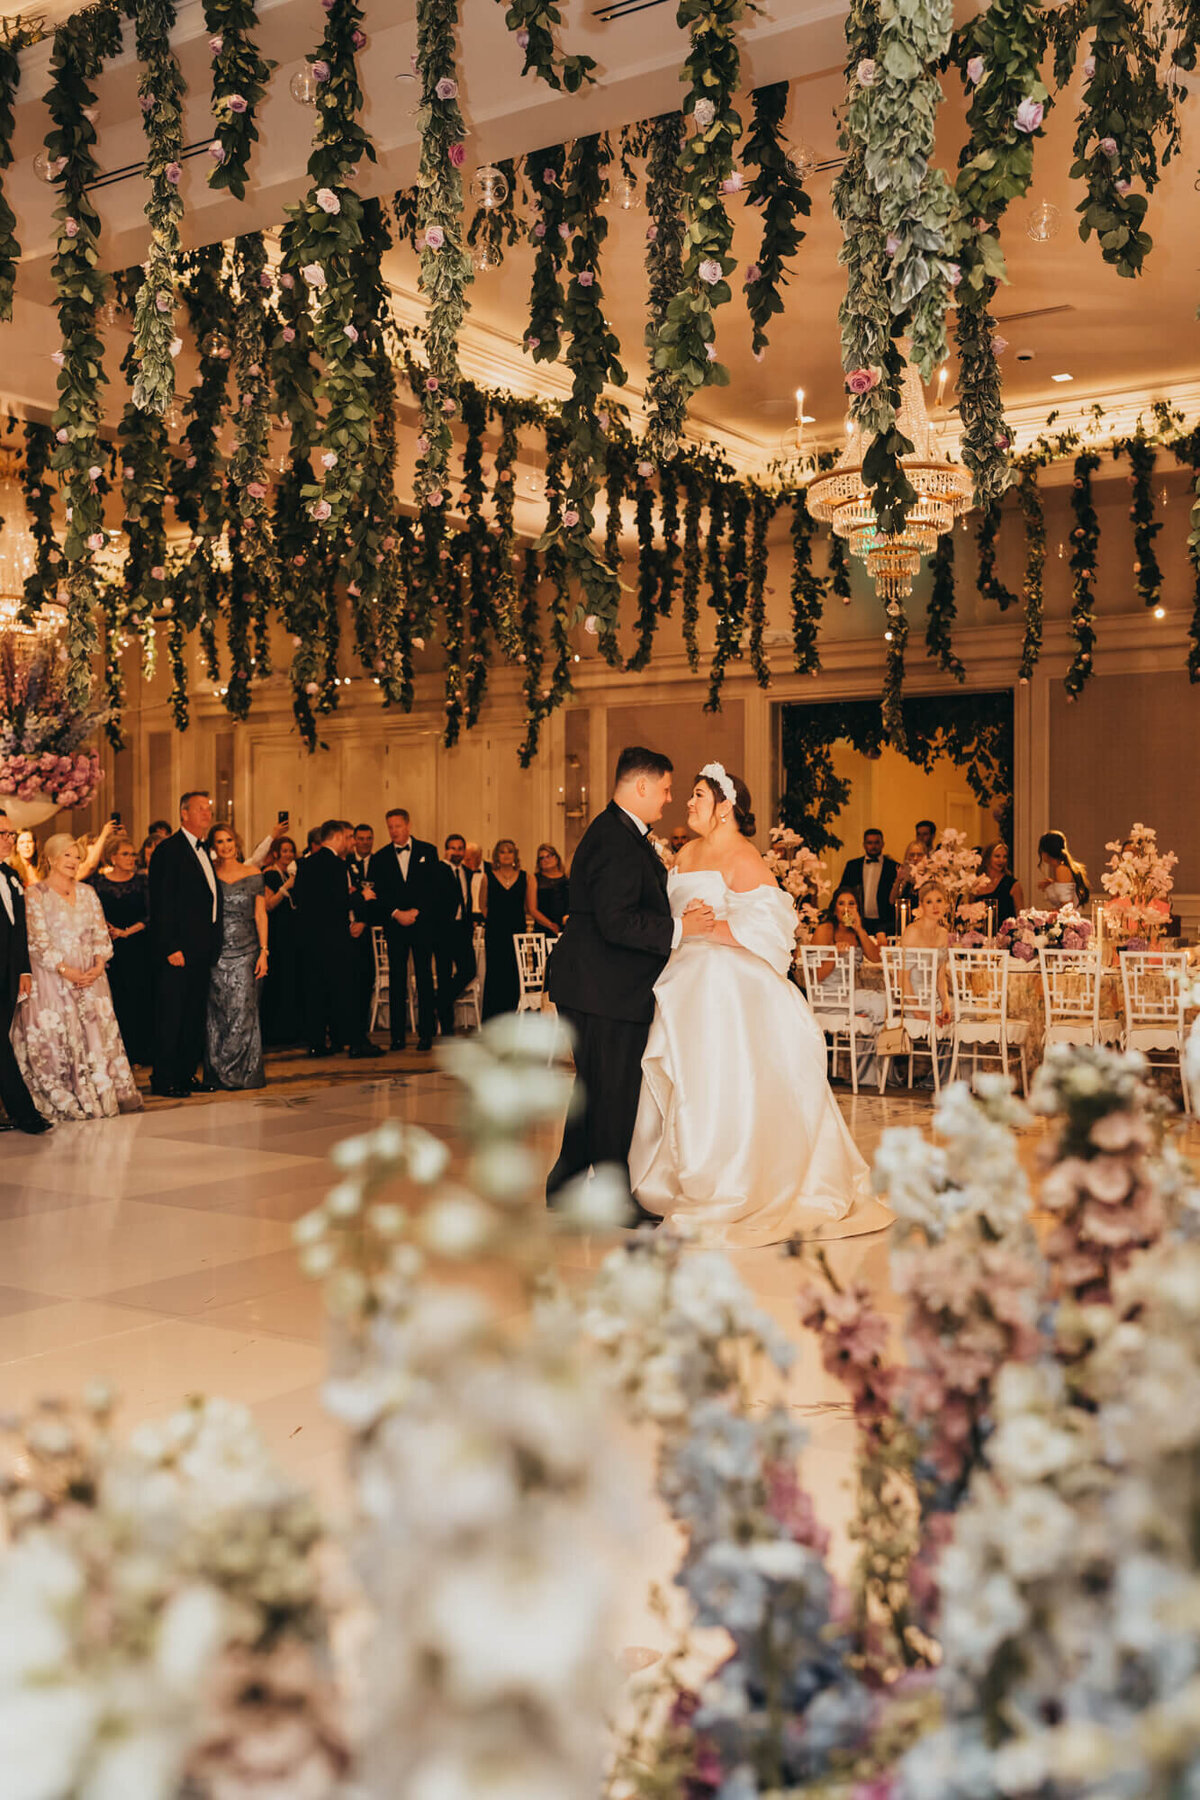 bride and groom share a first dance under hanging florals from the ceiling.